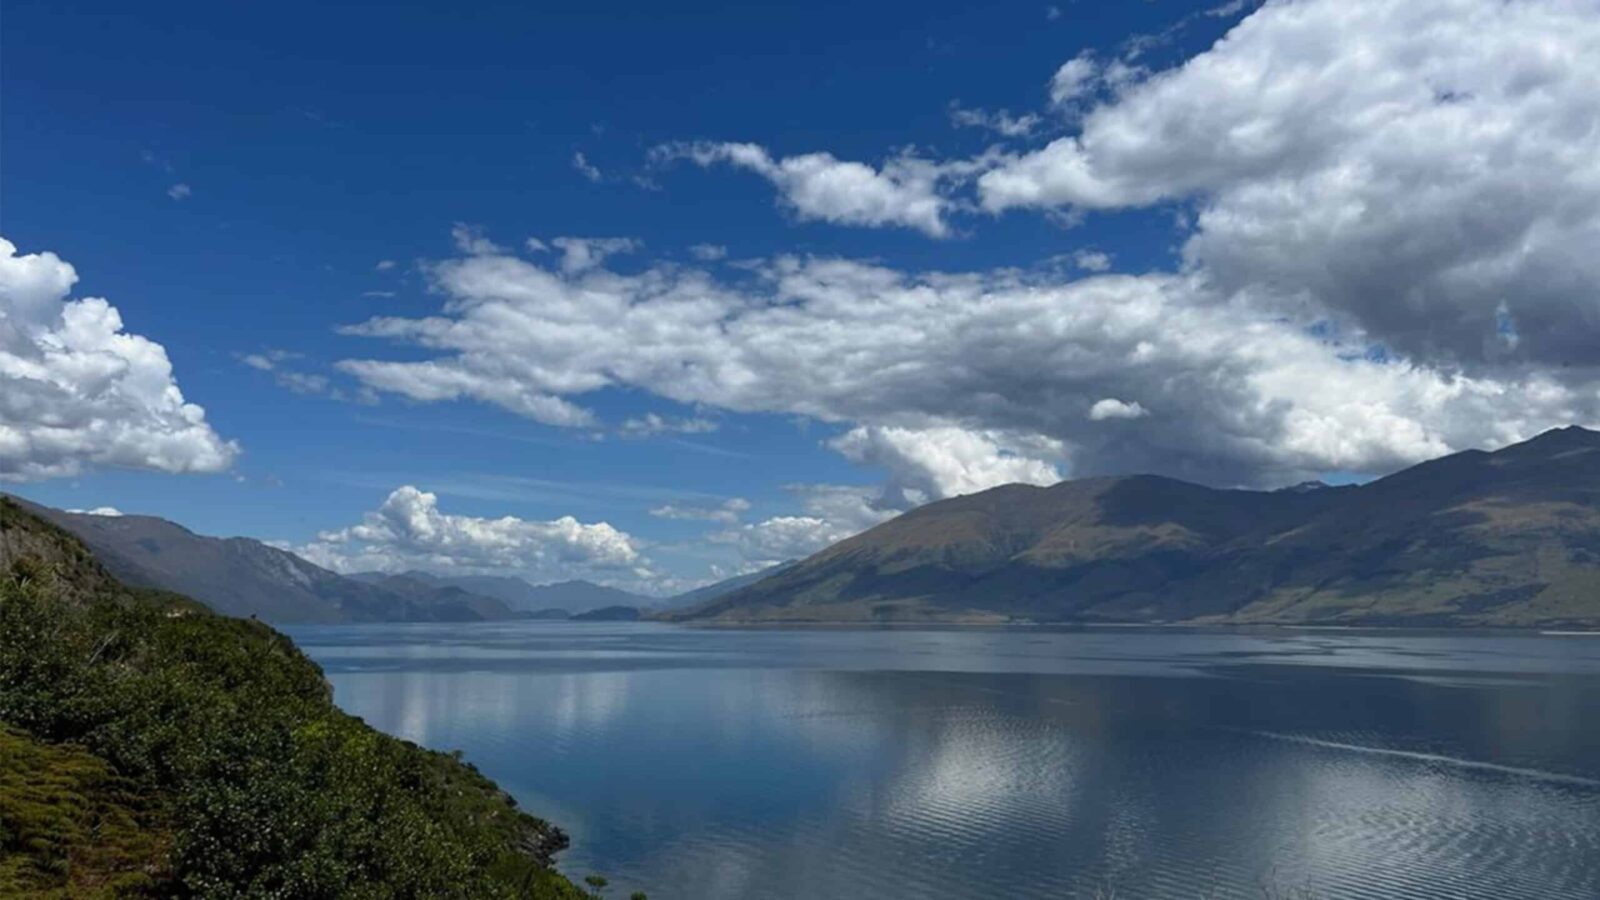 View of water and mountains with puffy clouds and blue skies on Adventures by Disney tour in New Zealand